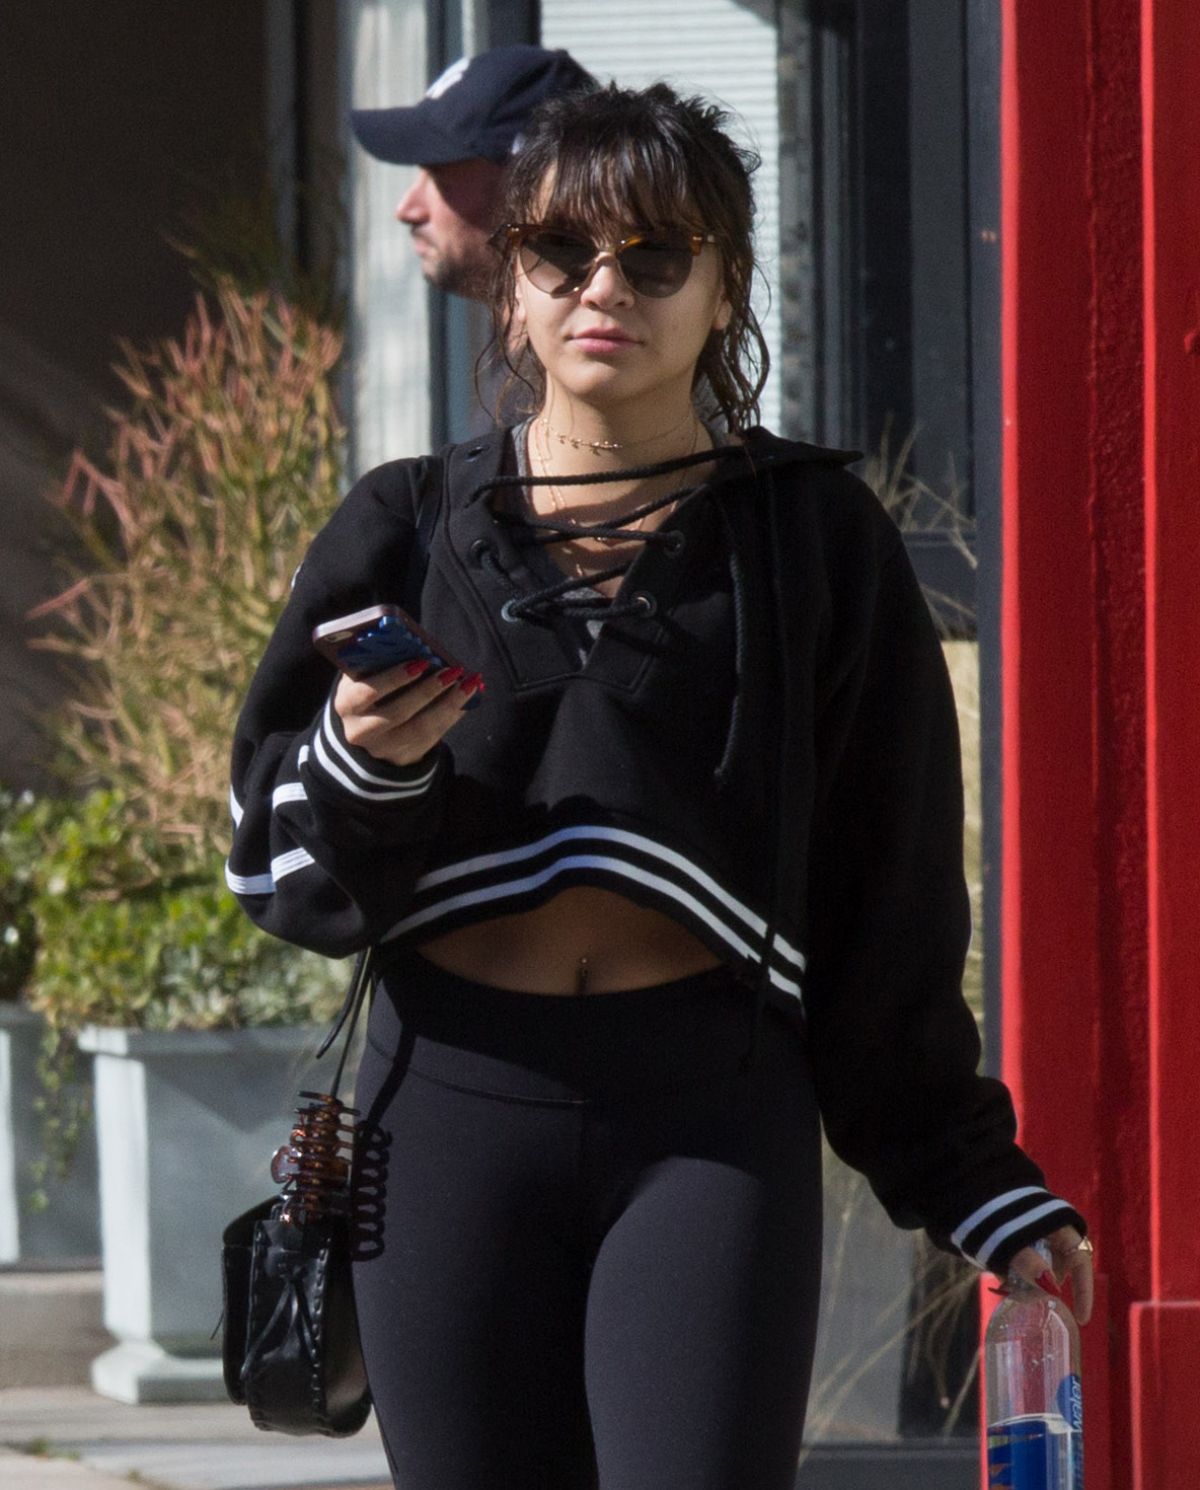 stella-hudgens-out-and-about-in-los-angeles-01-17-2017_1.jpg